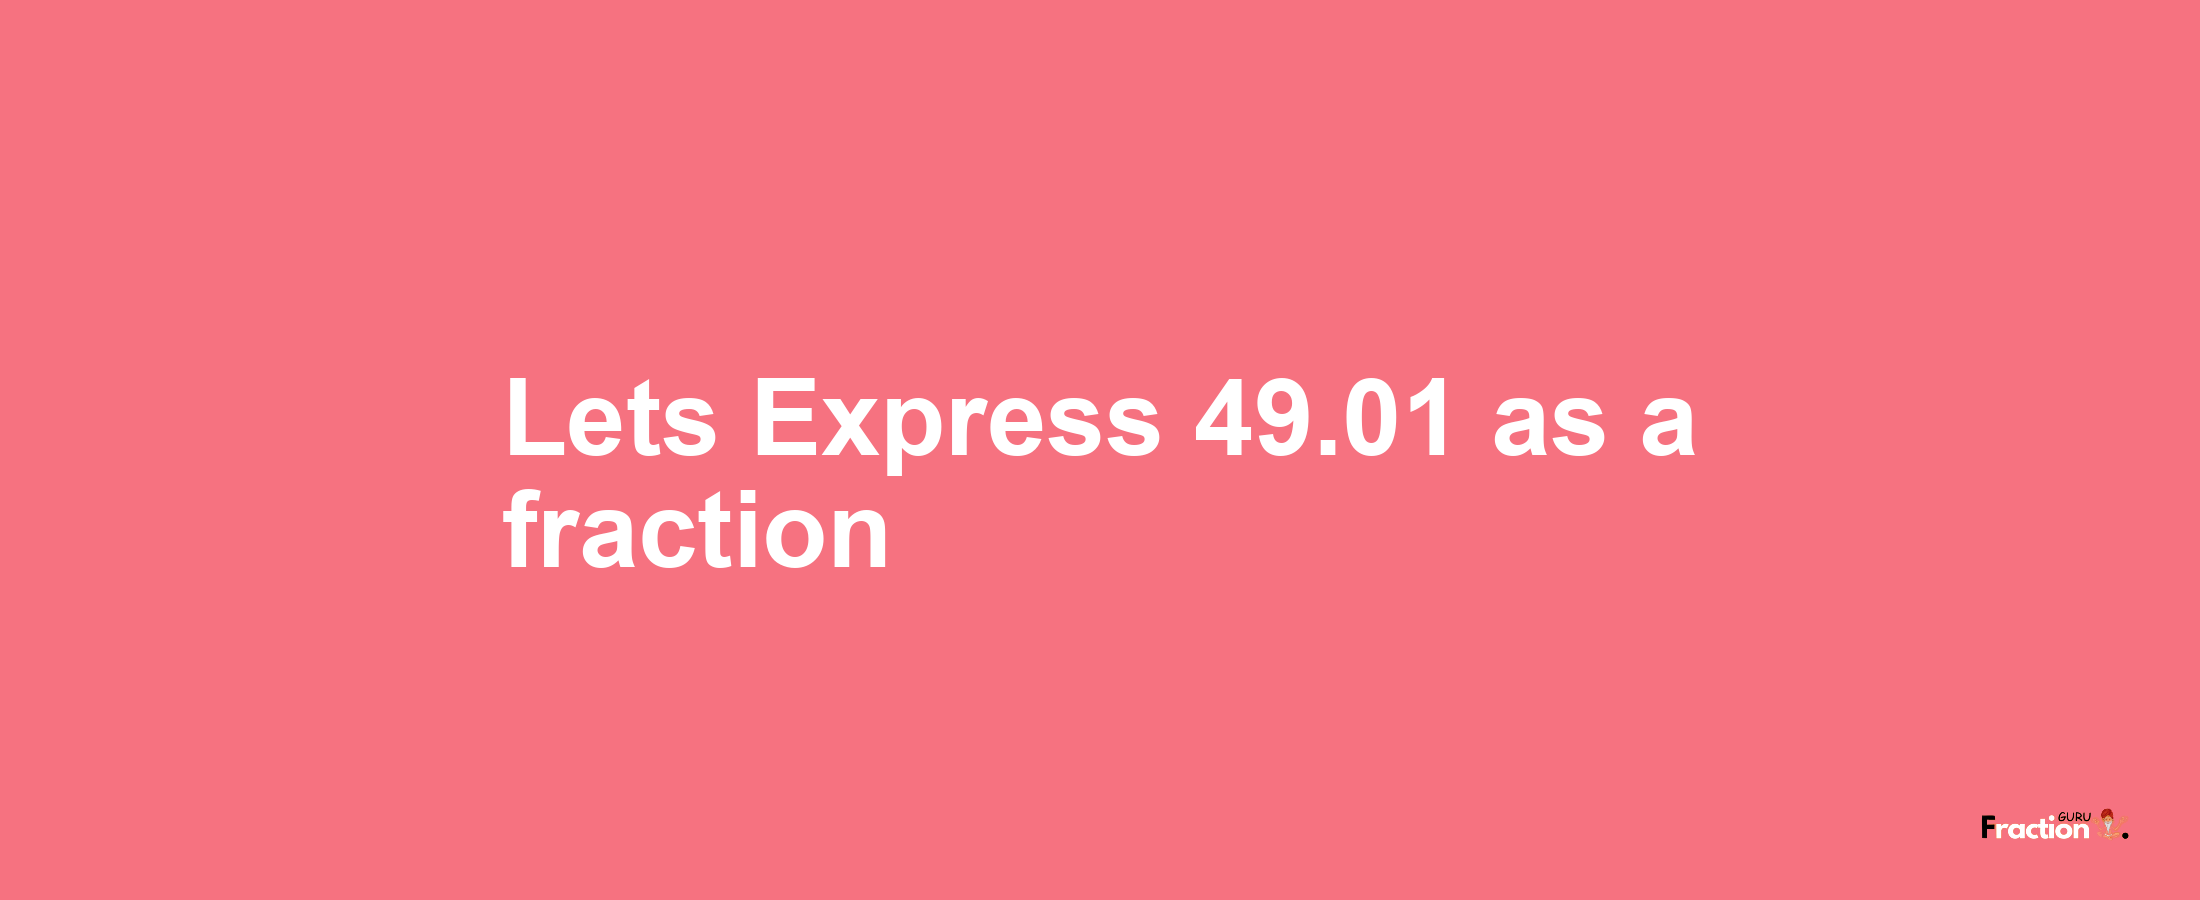 Lets Express 49.01 as afraction